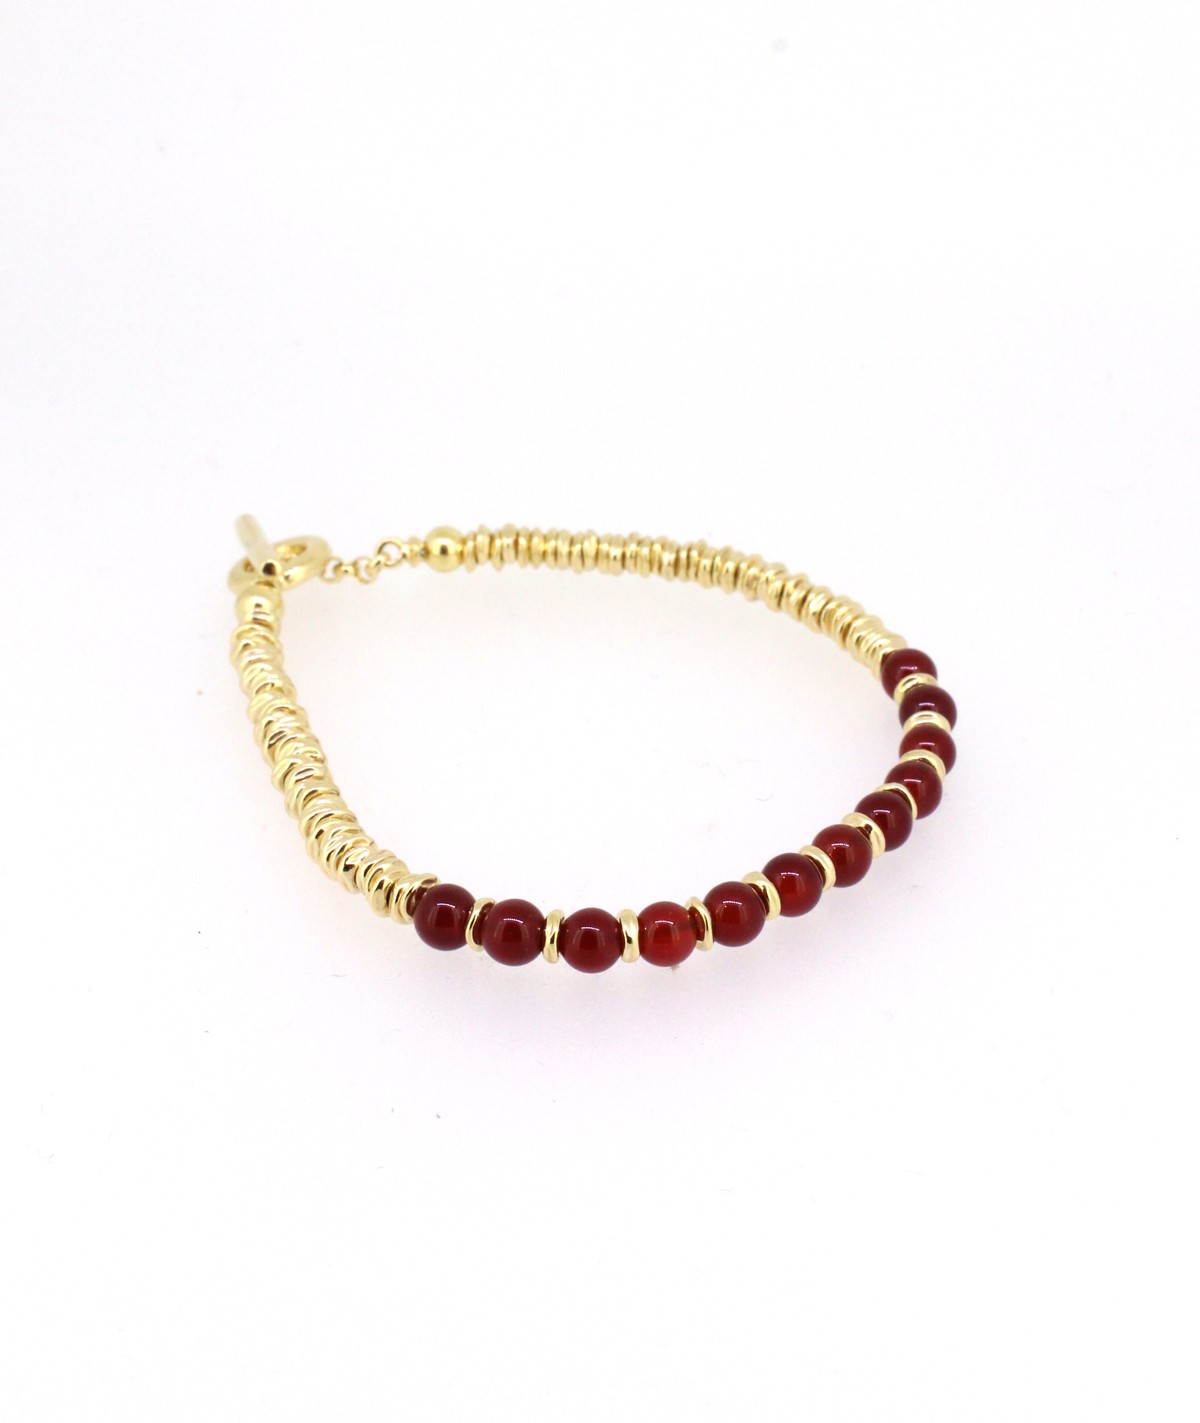 Armband Achat rot Silber goldp - Badel - B-T-RM3-YL-003